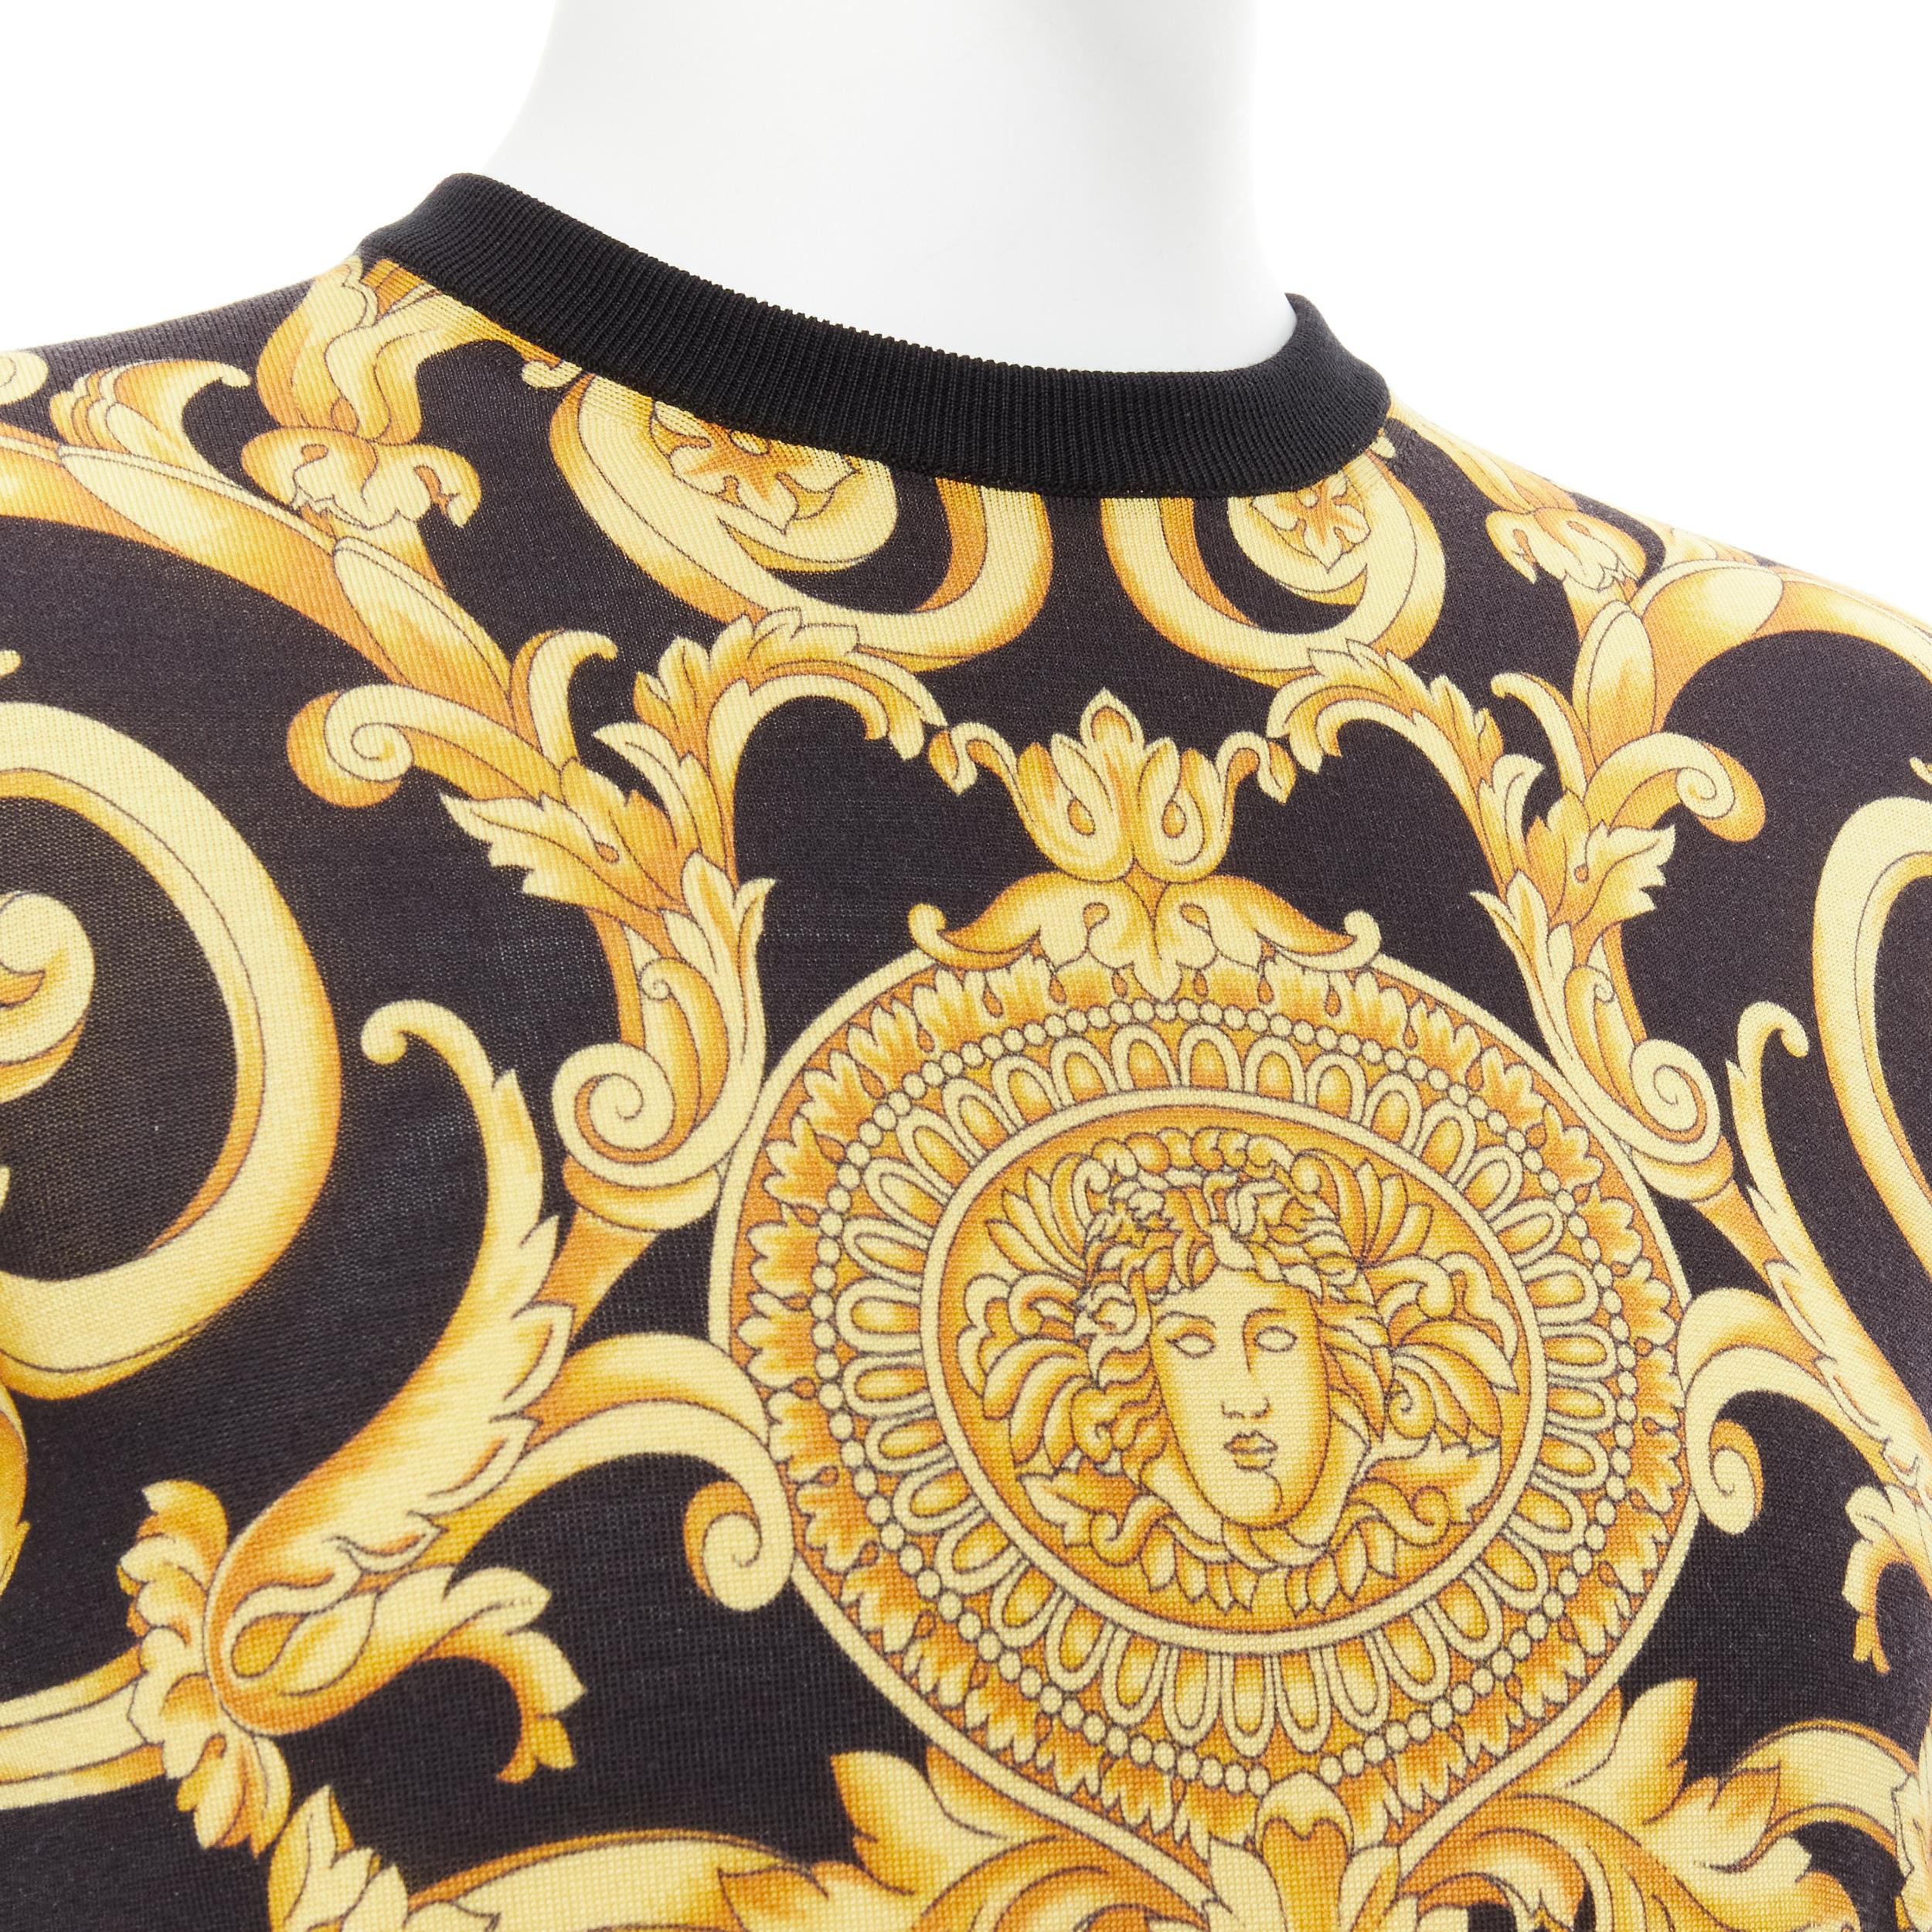 new VERSACE black gold Barocco Hibiscus Medusa 100% silk knit sweater IT48 M 
Reference: TGAS/C00289 
Brand: Versace 
Designer: Donatella Versace 
Collection: Barocco Hibiscus 
Material: Silk 
Color: Black 
Pattern: Floral 
Extra Detail: 100% silk